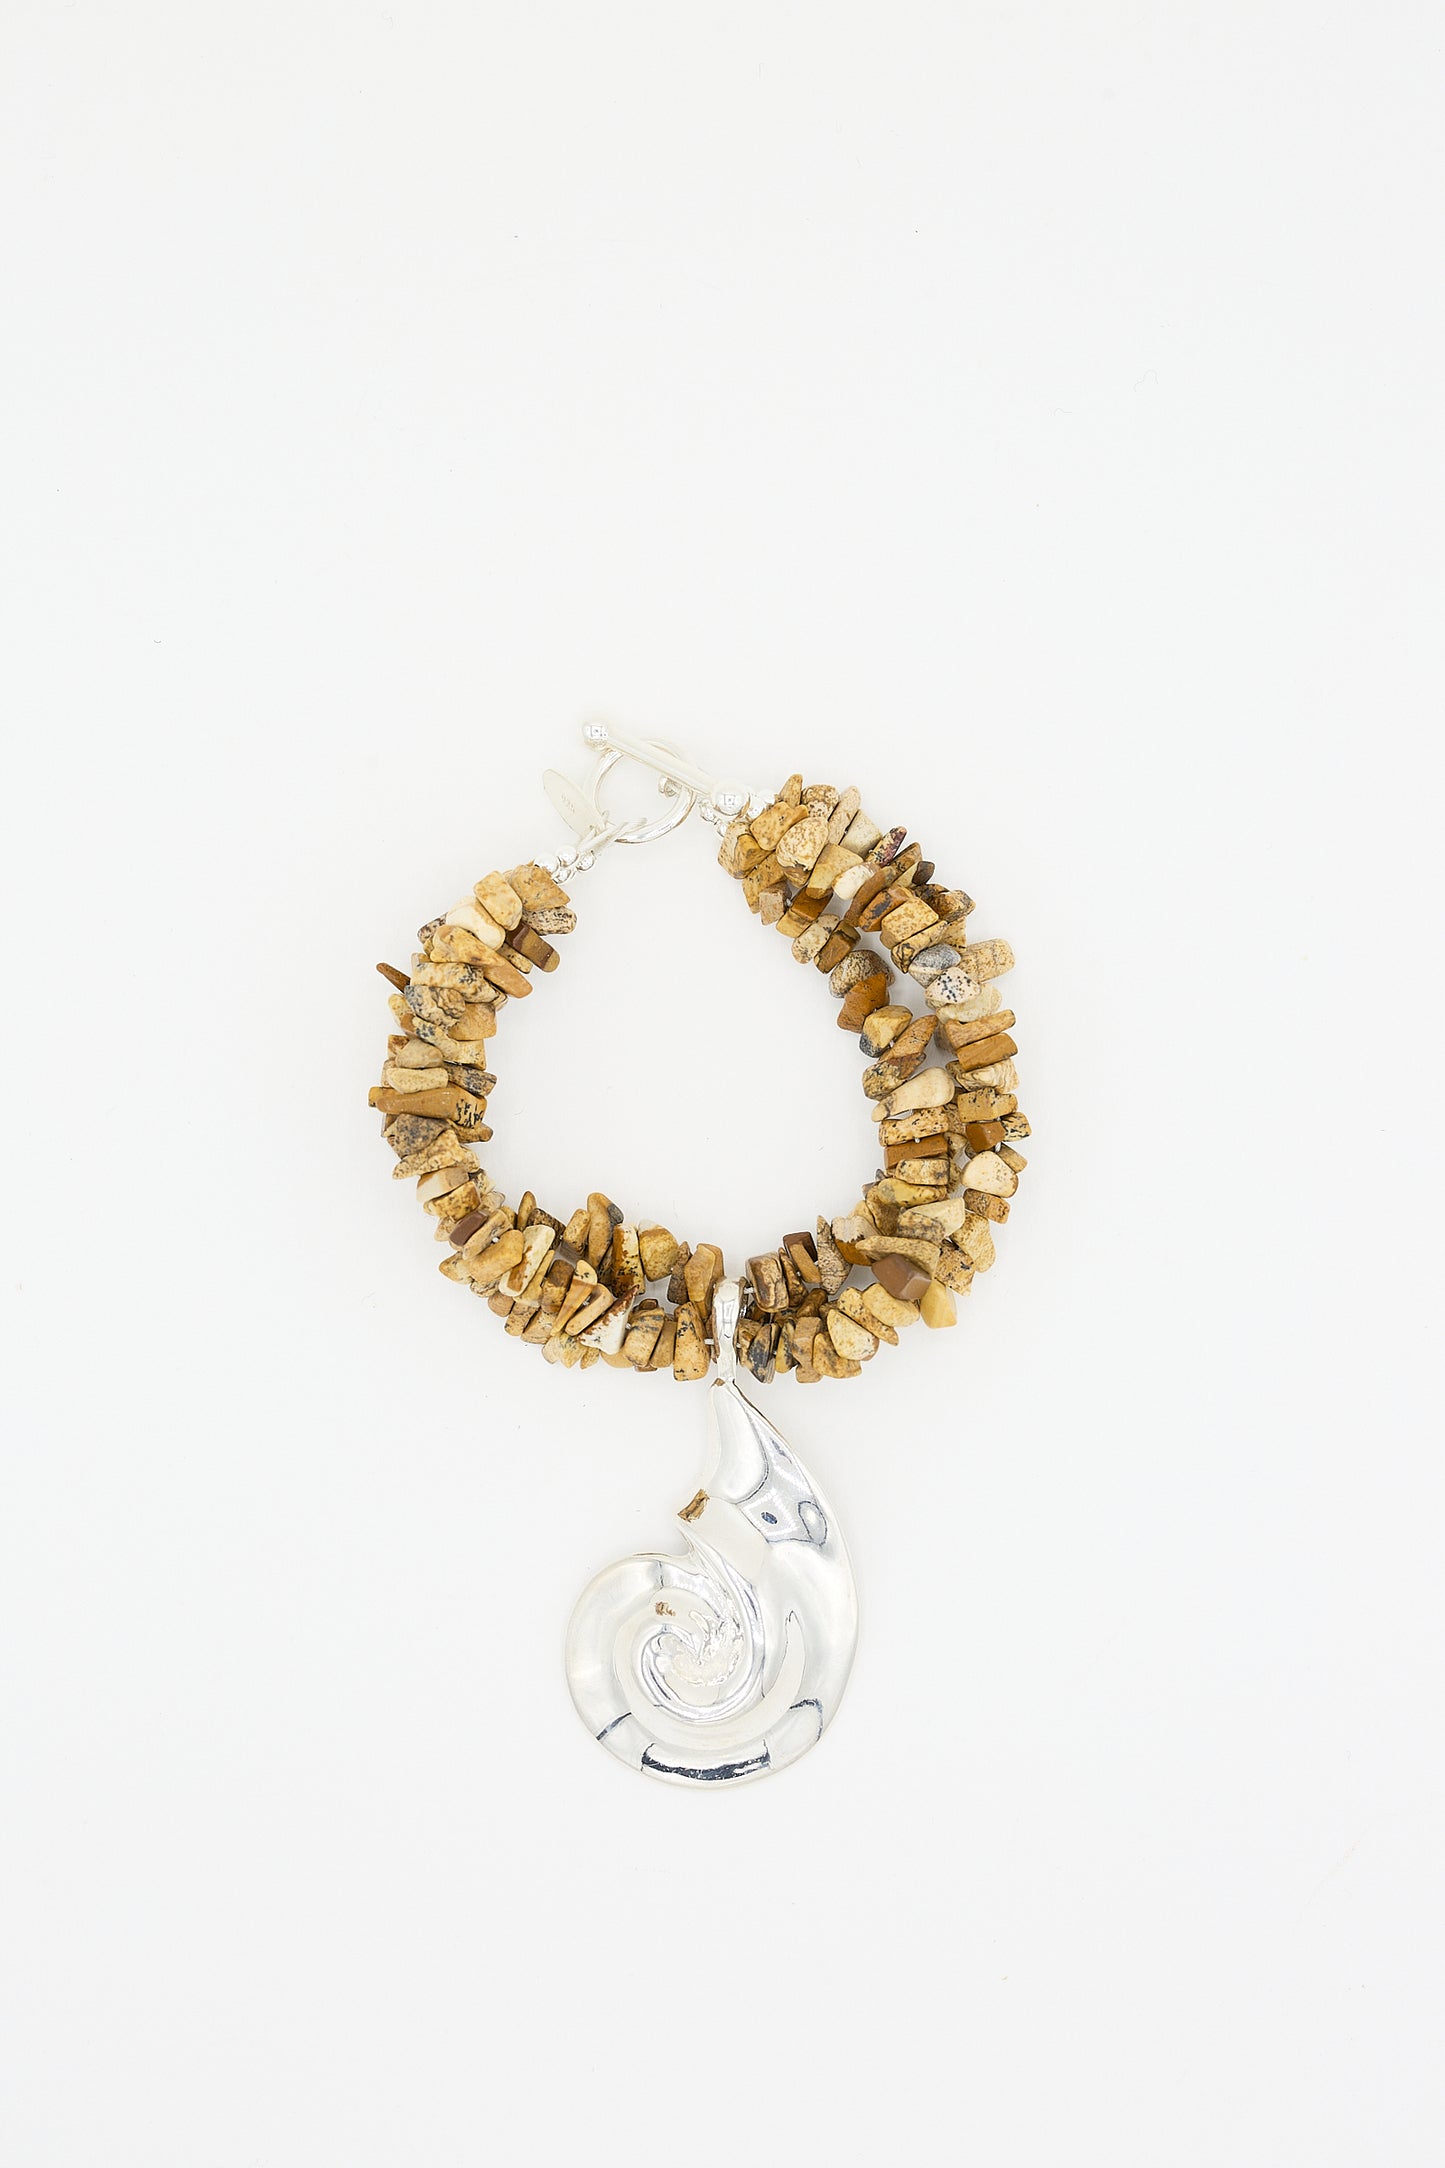 Handmade jewelry: Cata Bracelet in Sand Jasper with a sterling silver pendant on a white background by Santangelo.